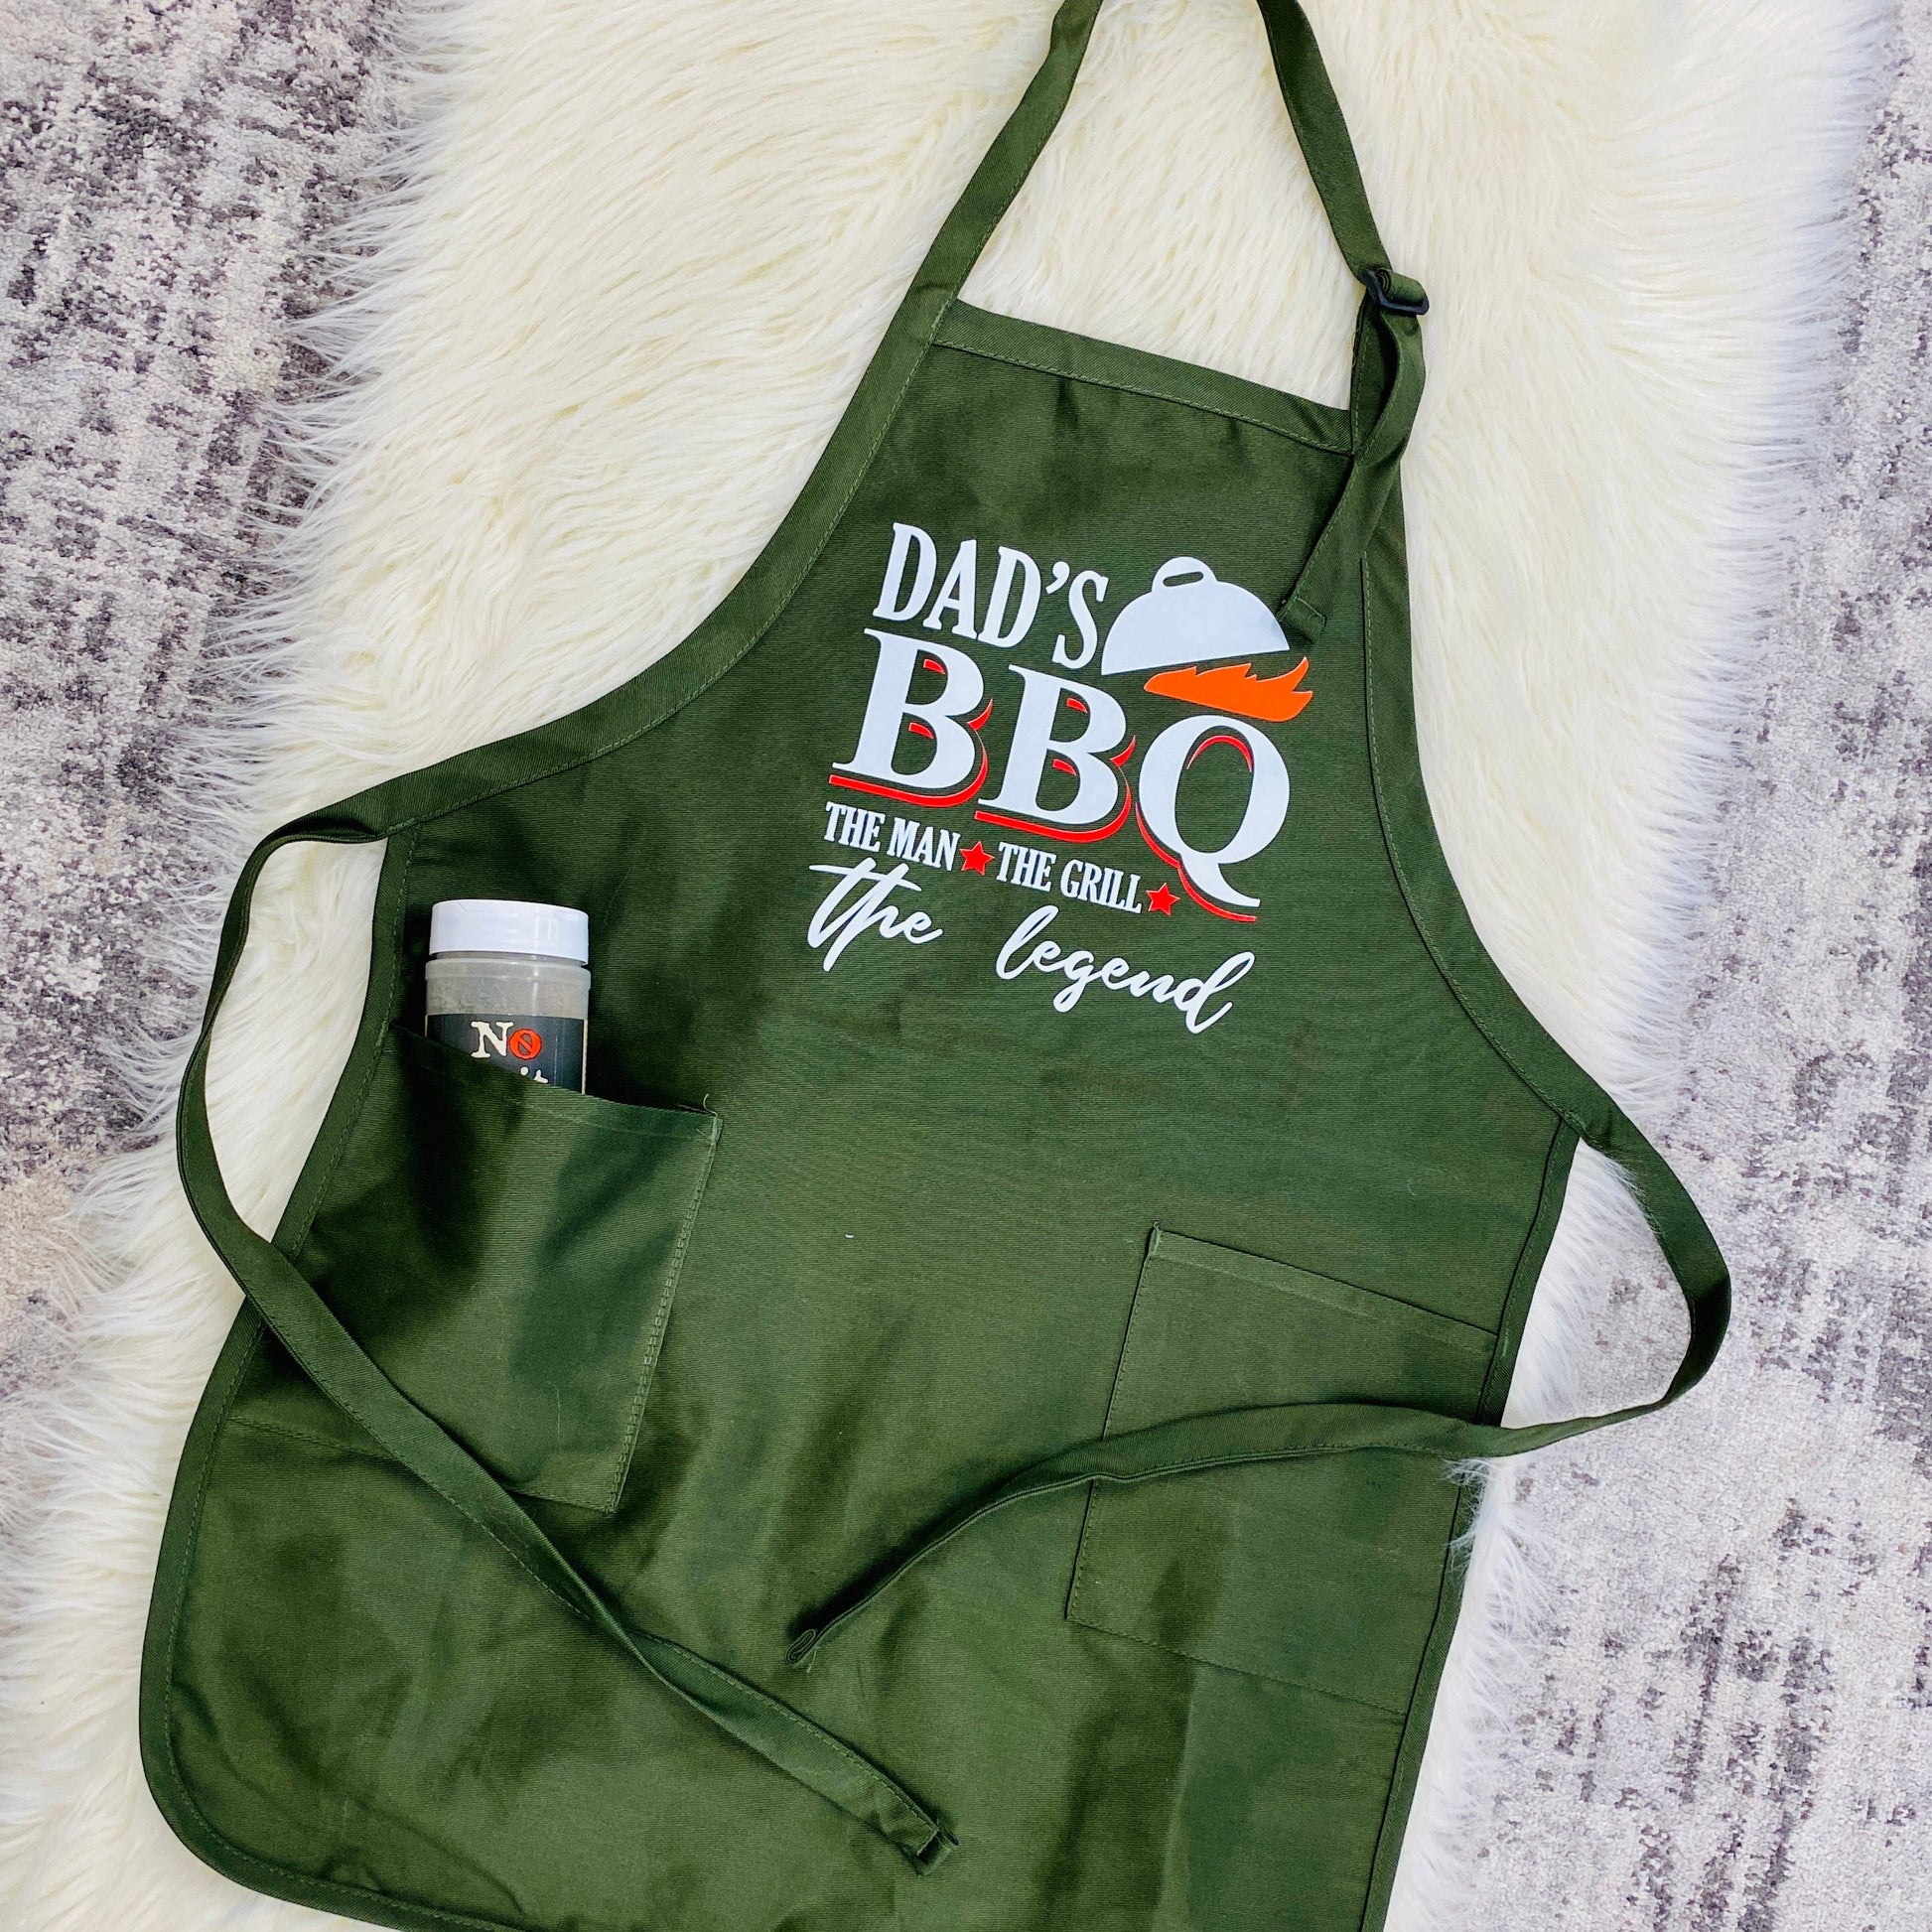 Get your dad an apron he'll love! This green apron is perfect for a sleek masculine look. On the front is the graphic that reads the following, "Dad's BBQ The Man, The Grill, The Legend" With a grill top and flames. 